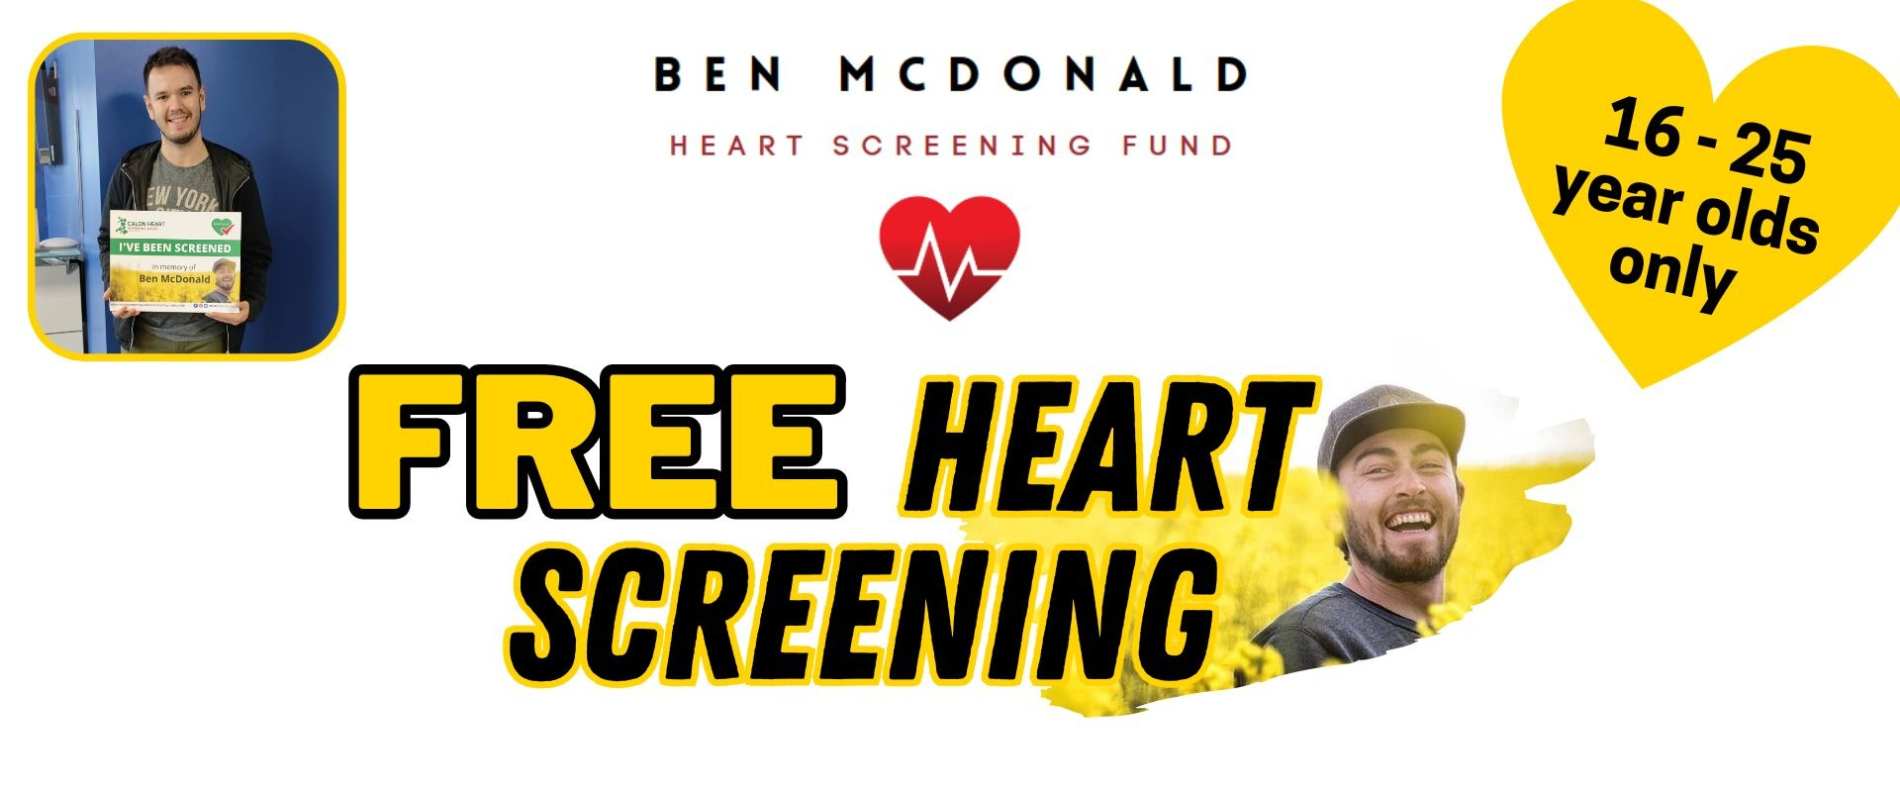 FREE Heart Screenings for 16-25 year olds